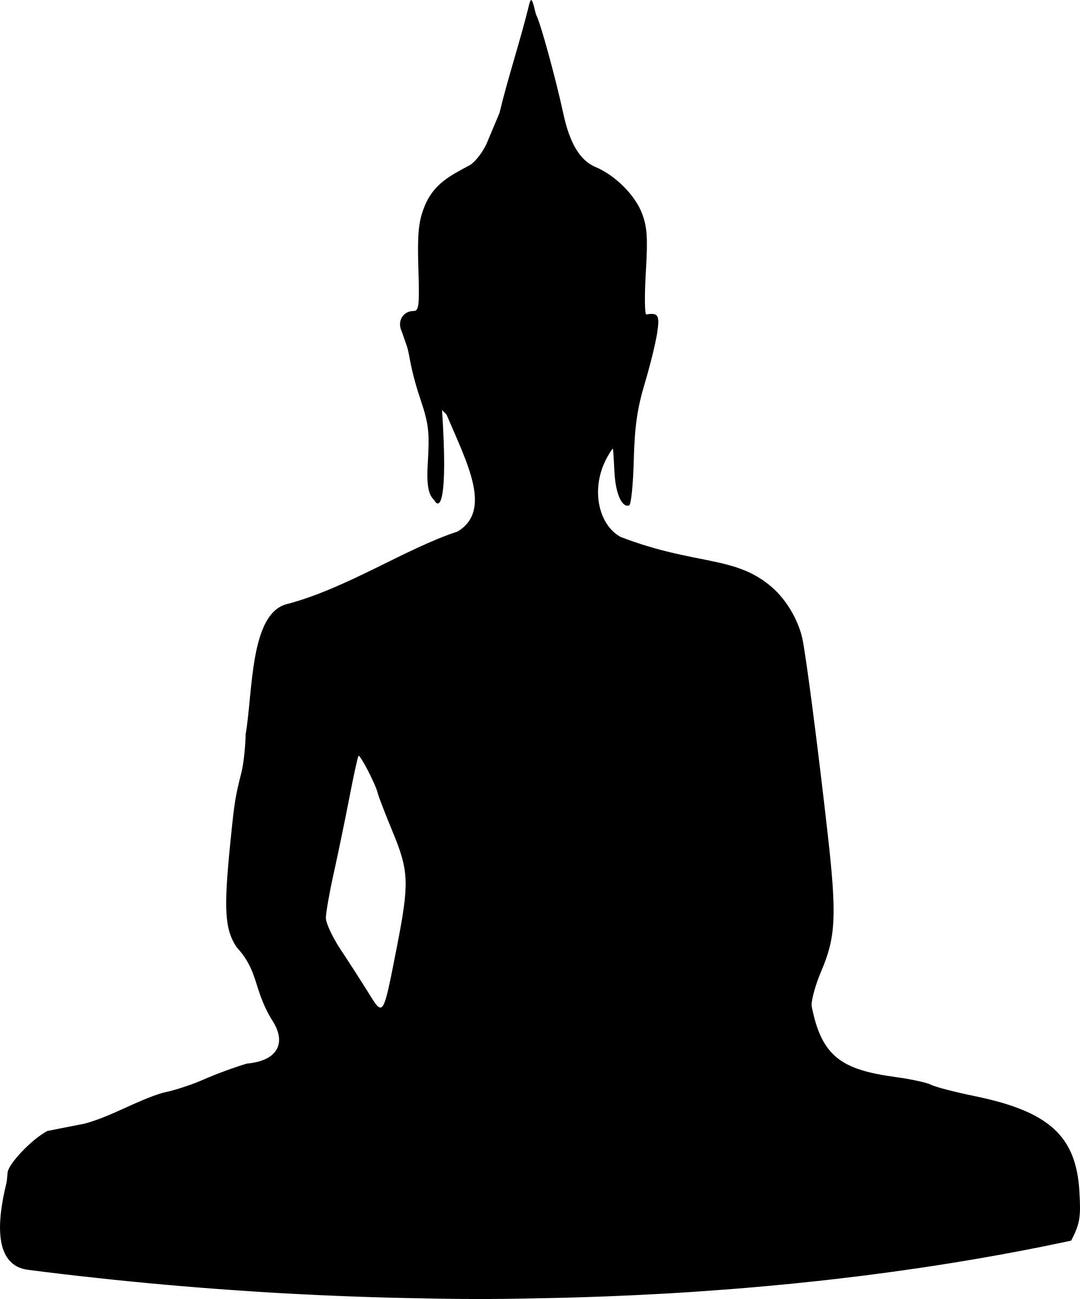 Sitting Buddha Silhouette png transparent